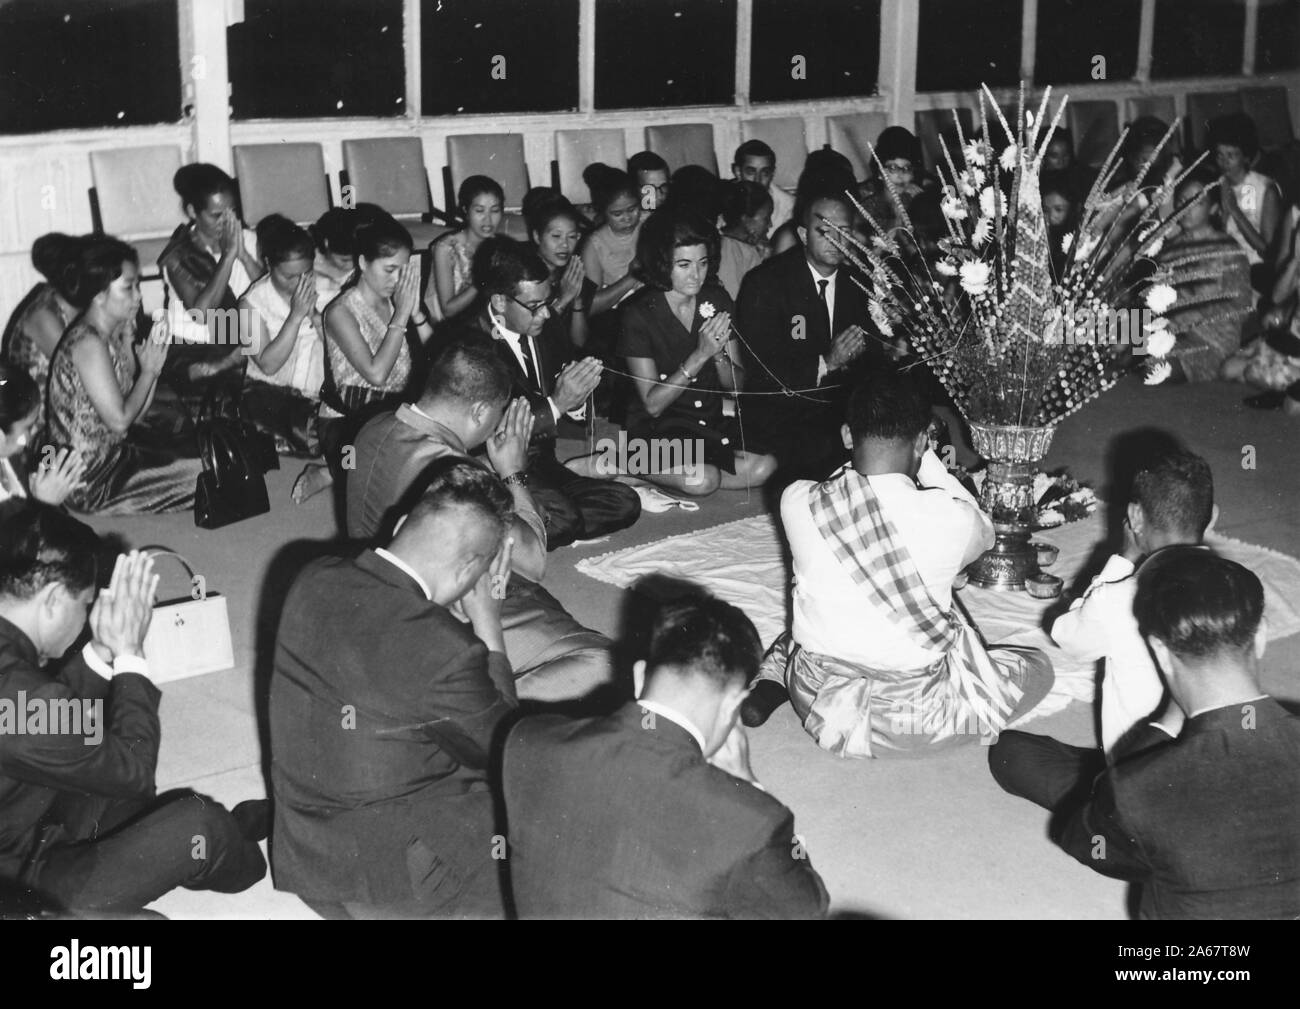 A group of formally dressed men and women sit on the floor, with their palms in the wai position, during a Baci ceremony at a joint function for the American military and the Royal Thai Army, photographed during the Vietnam War, 1968. () Stock Photo